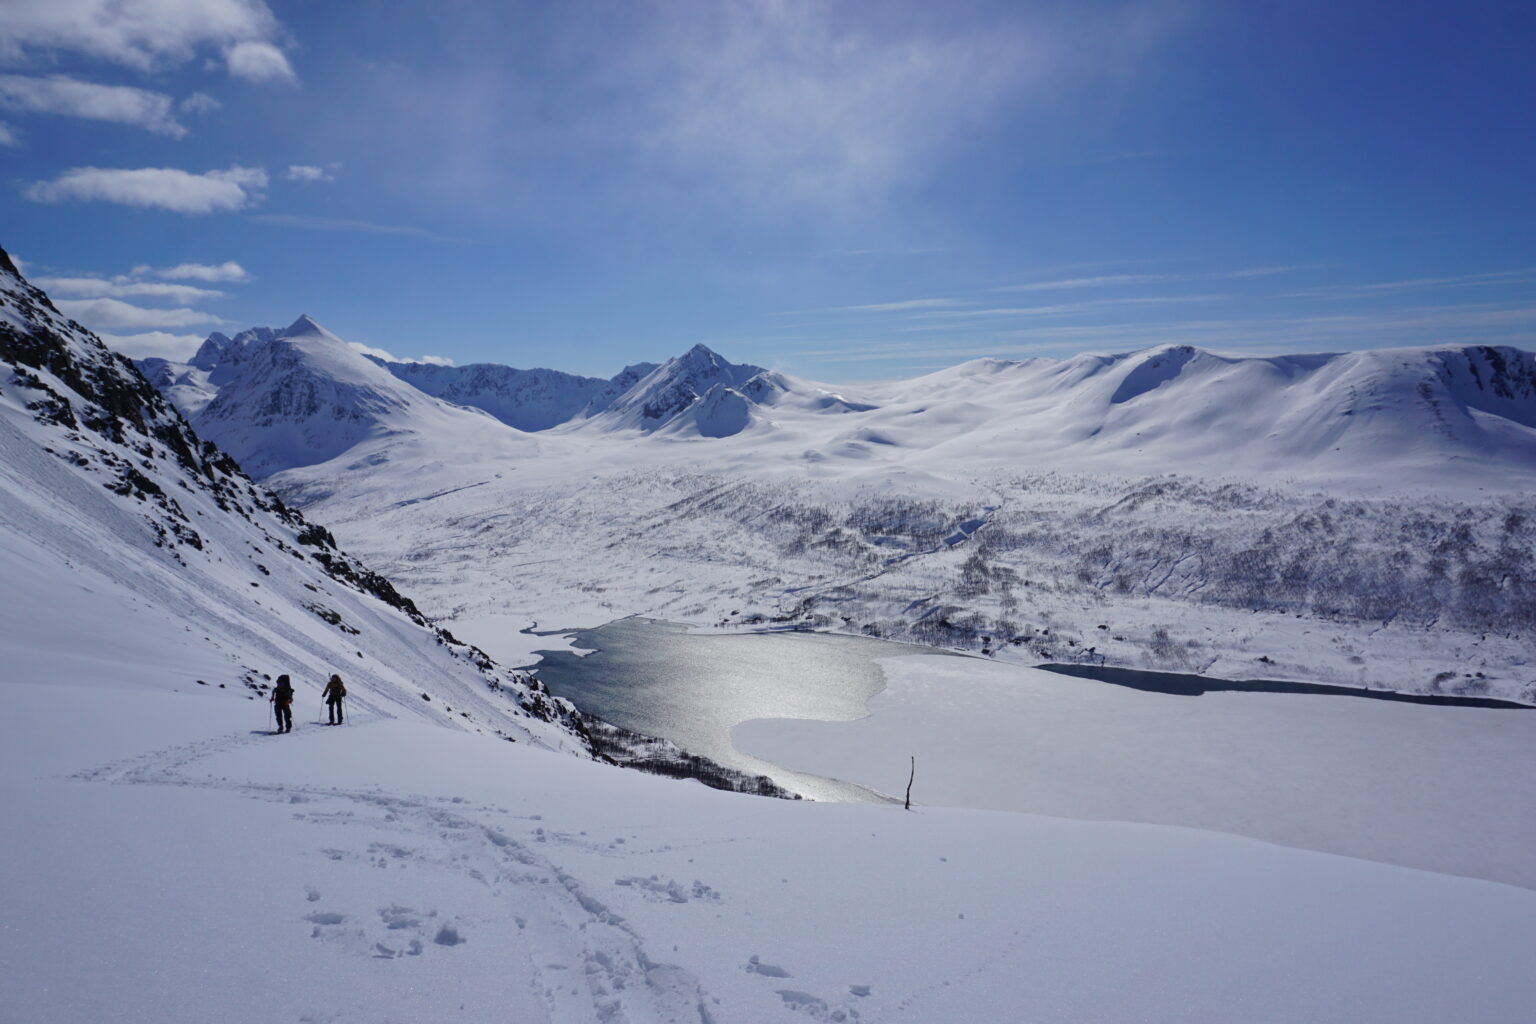 Heading up the Southwest slopes of Storgalten while on the Lyngen Alps Traverse